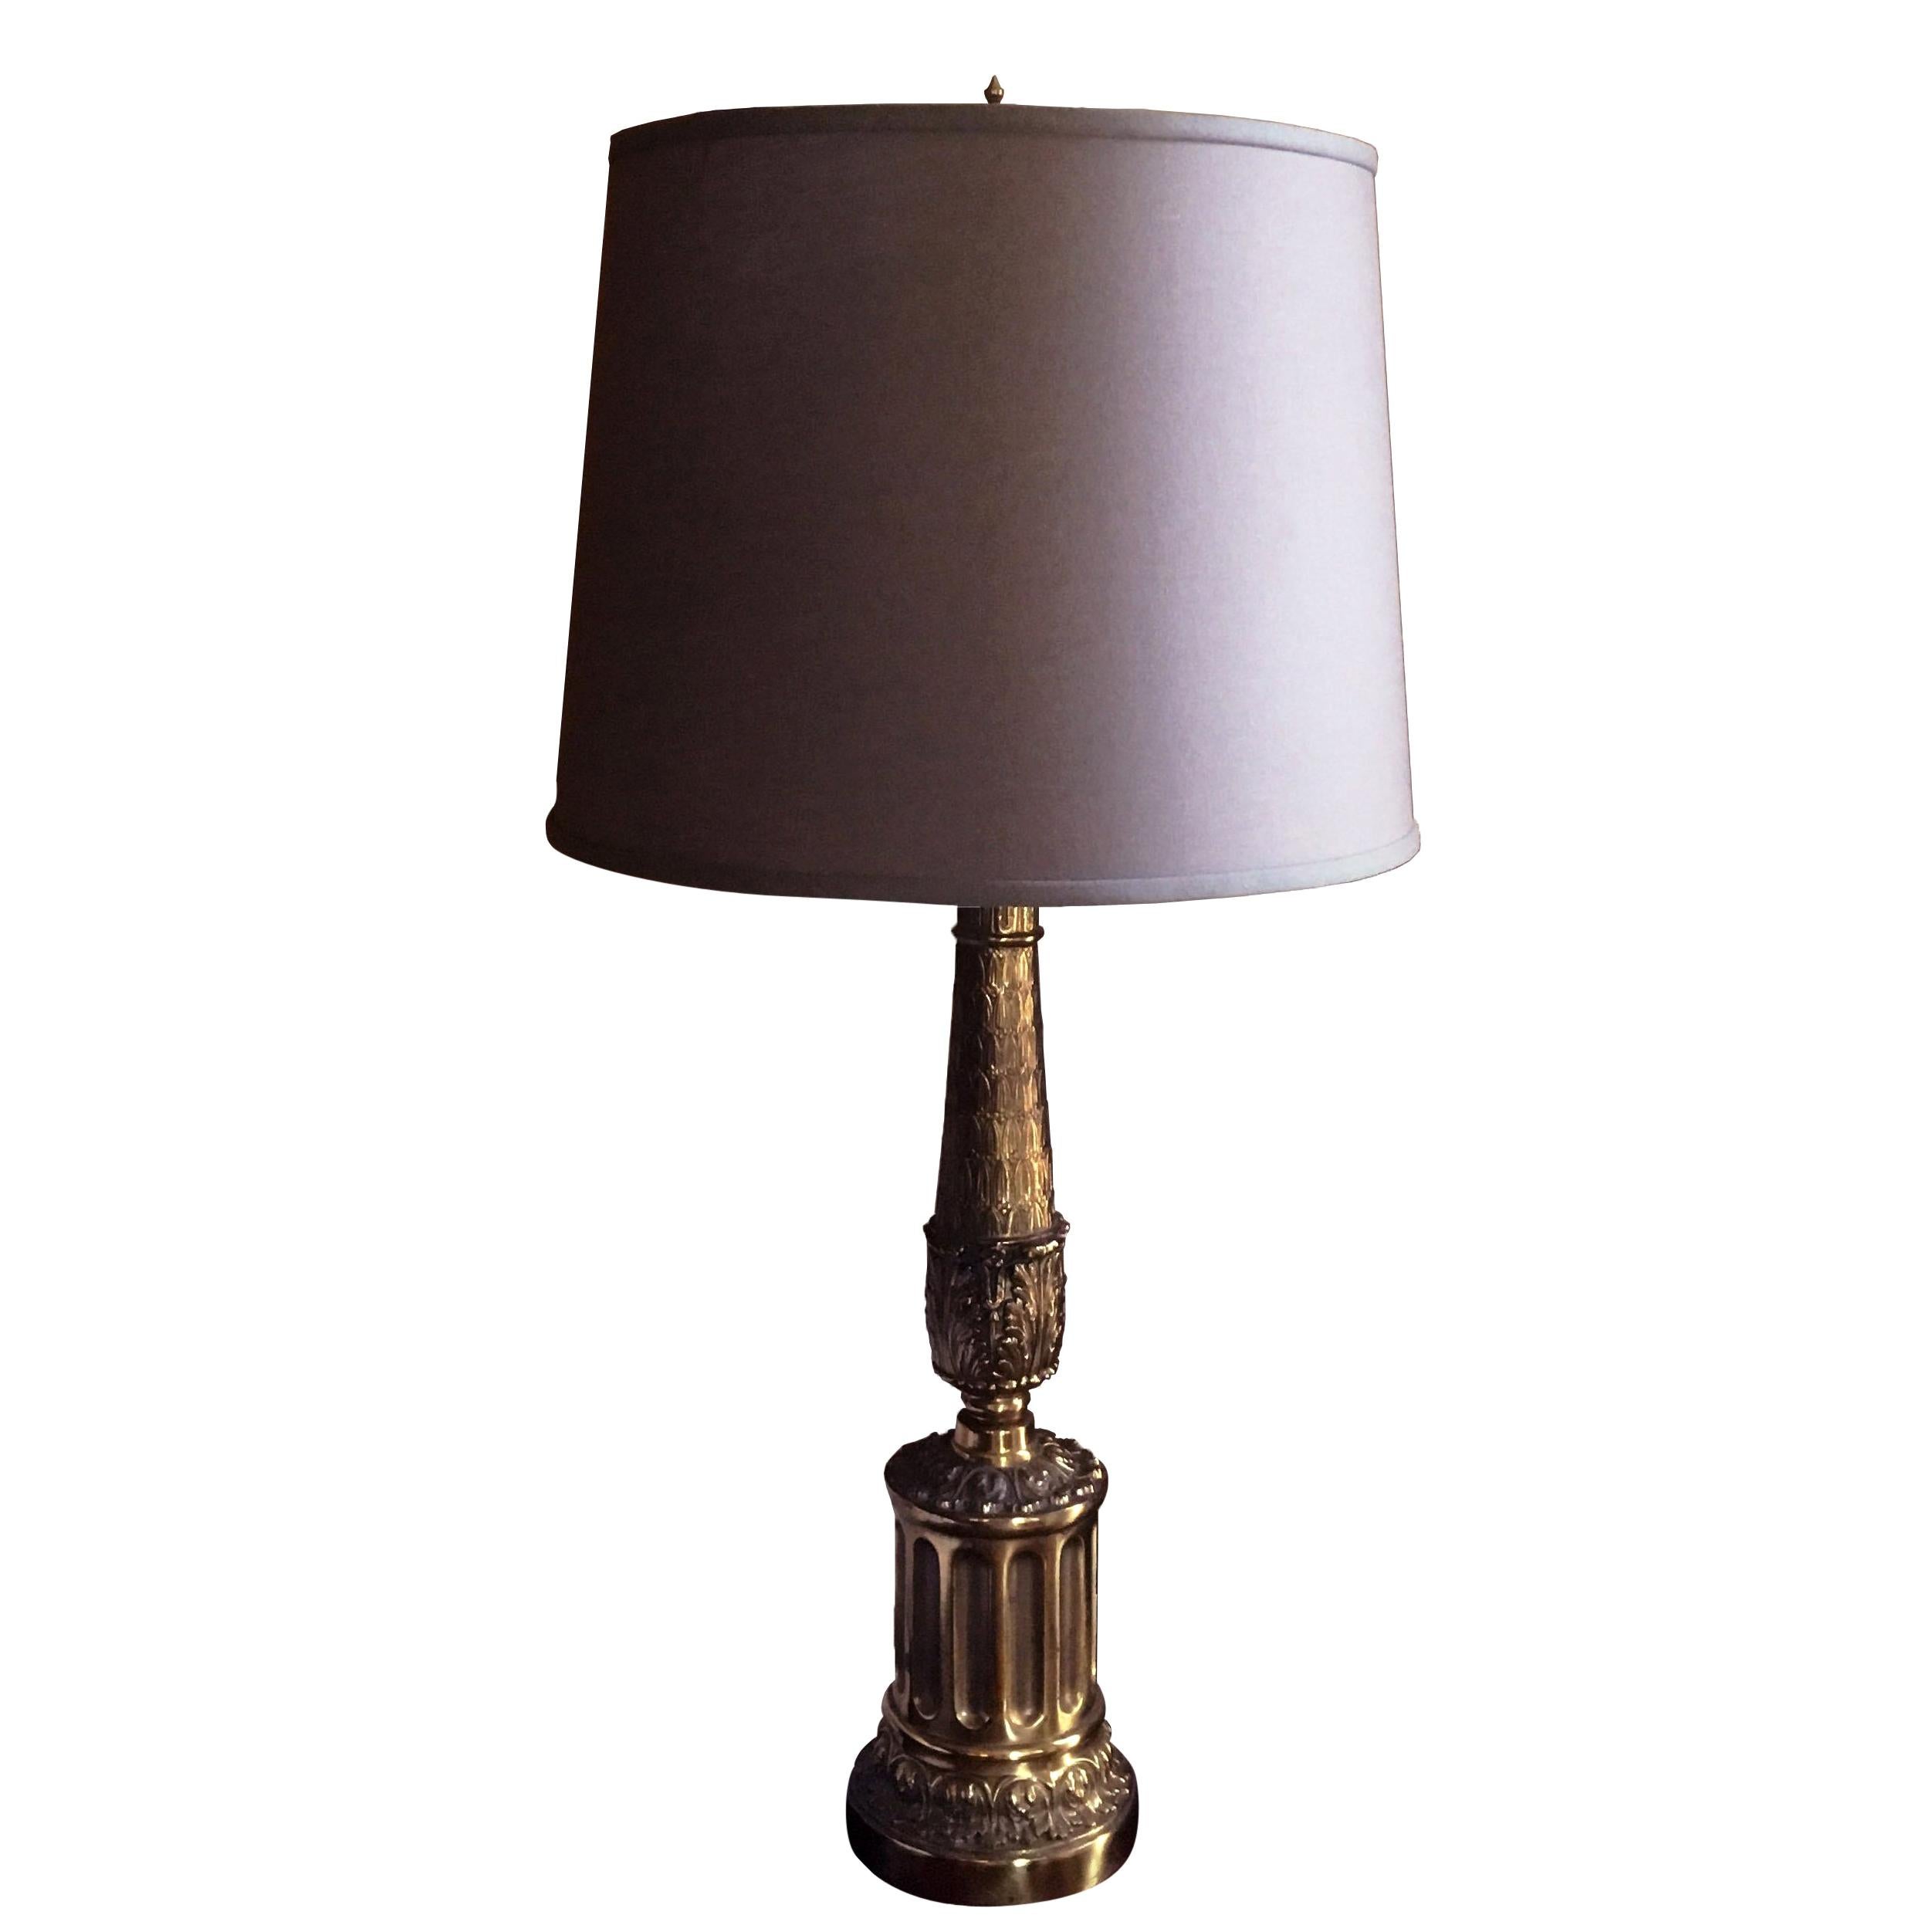 Hollywood Regency Table Lamp with Acanthus Baluster Base and Bouilotte Shade For Sale